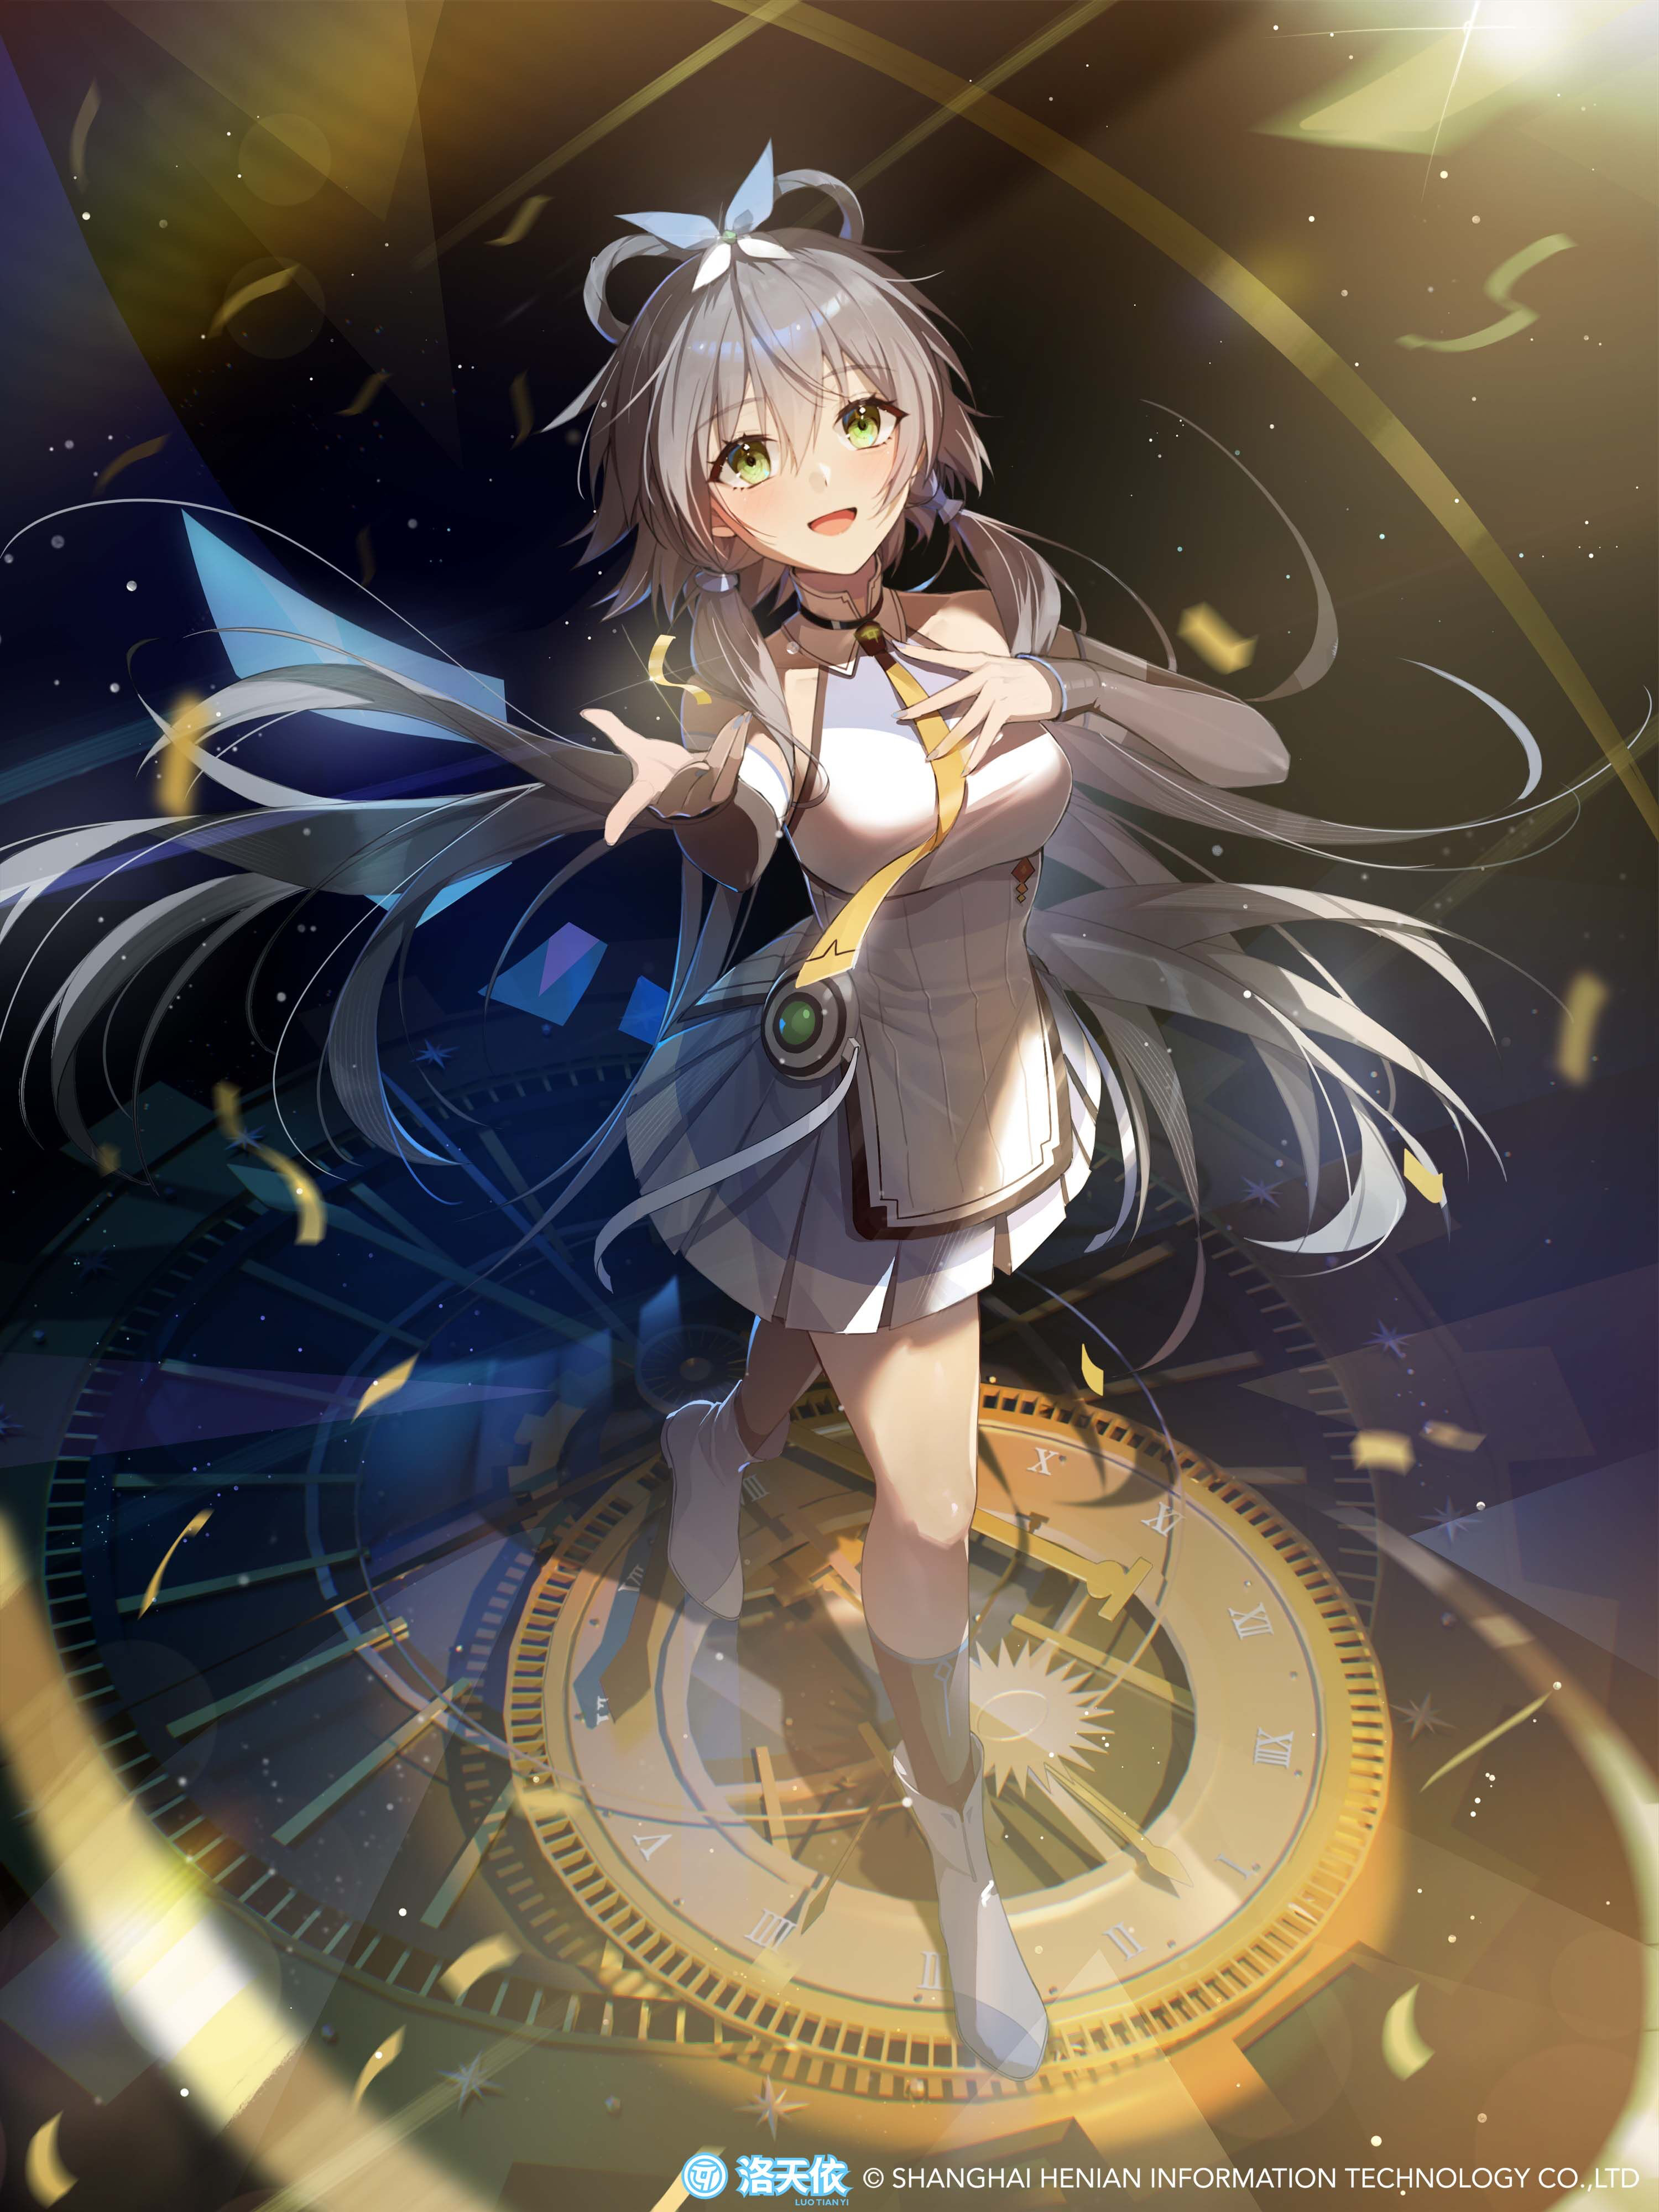 Anime 3000x4000 anime anime girls Luo Tianyi (vocaloid) portrait display tie confetti Vocaloid